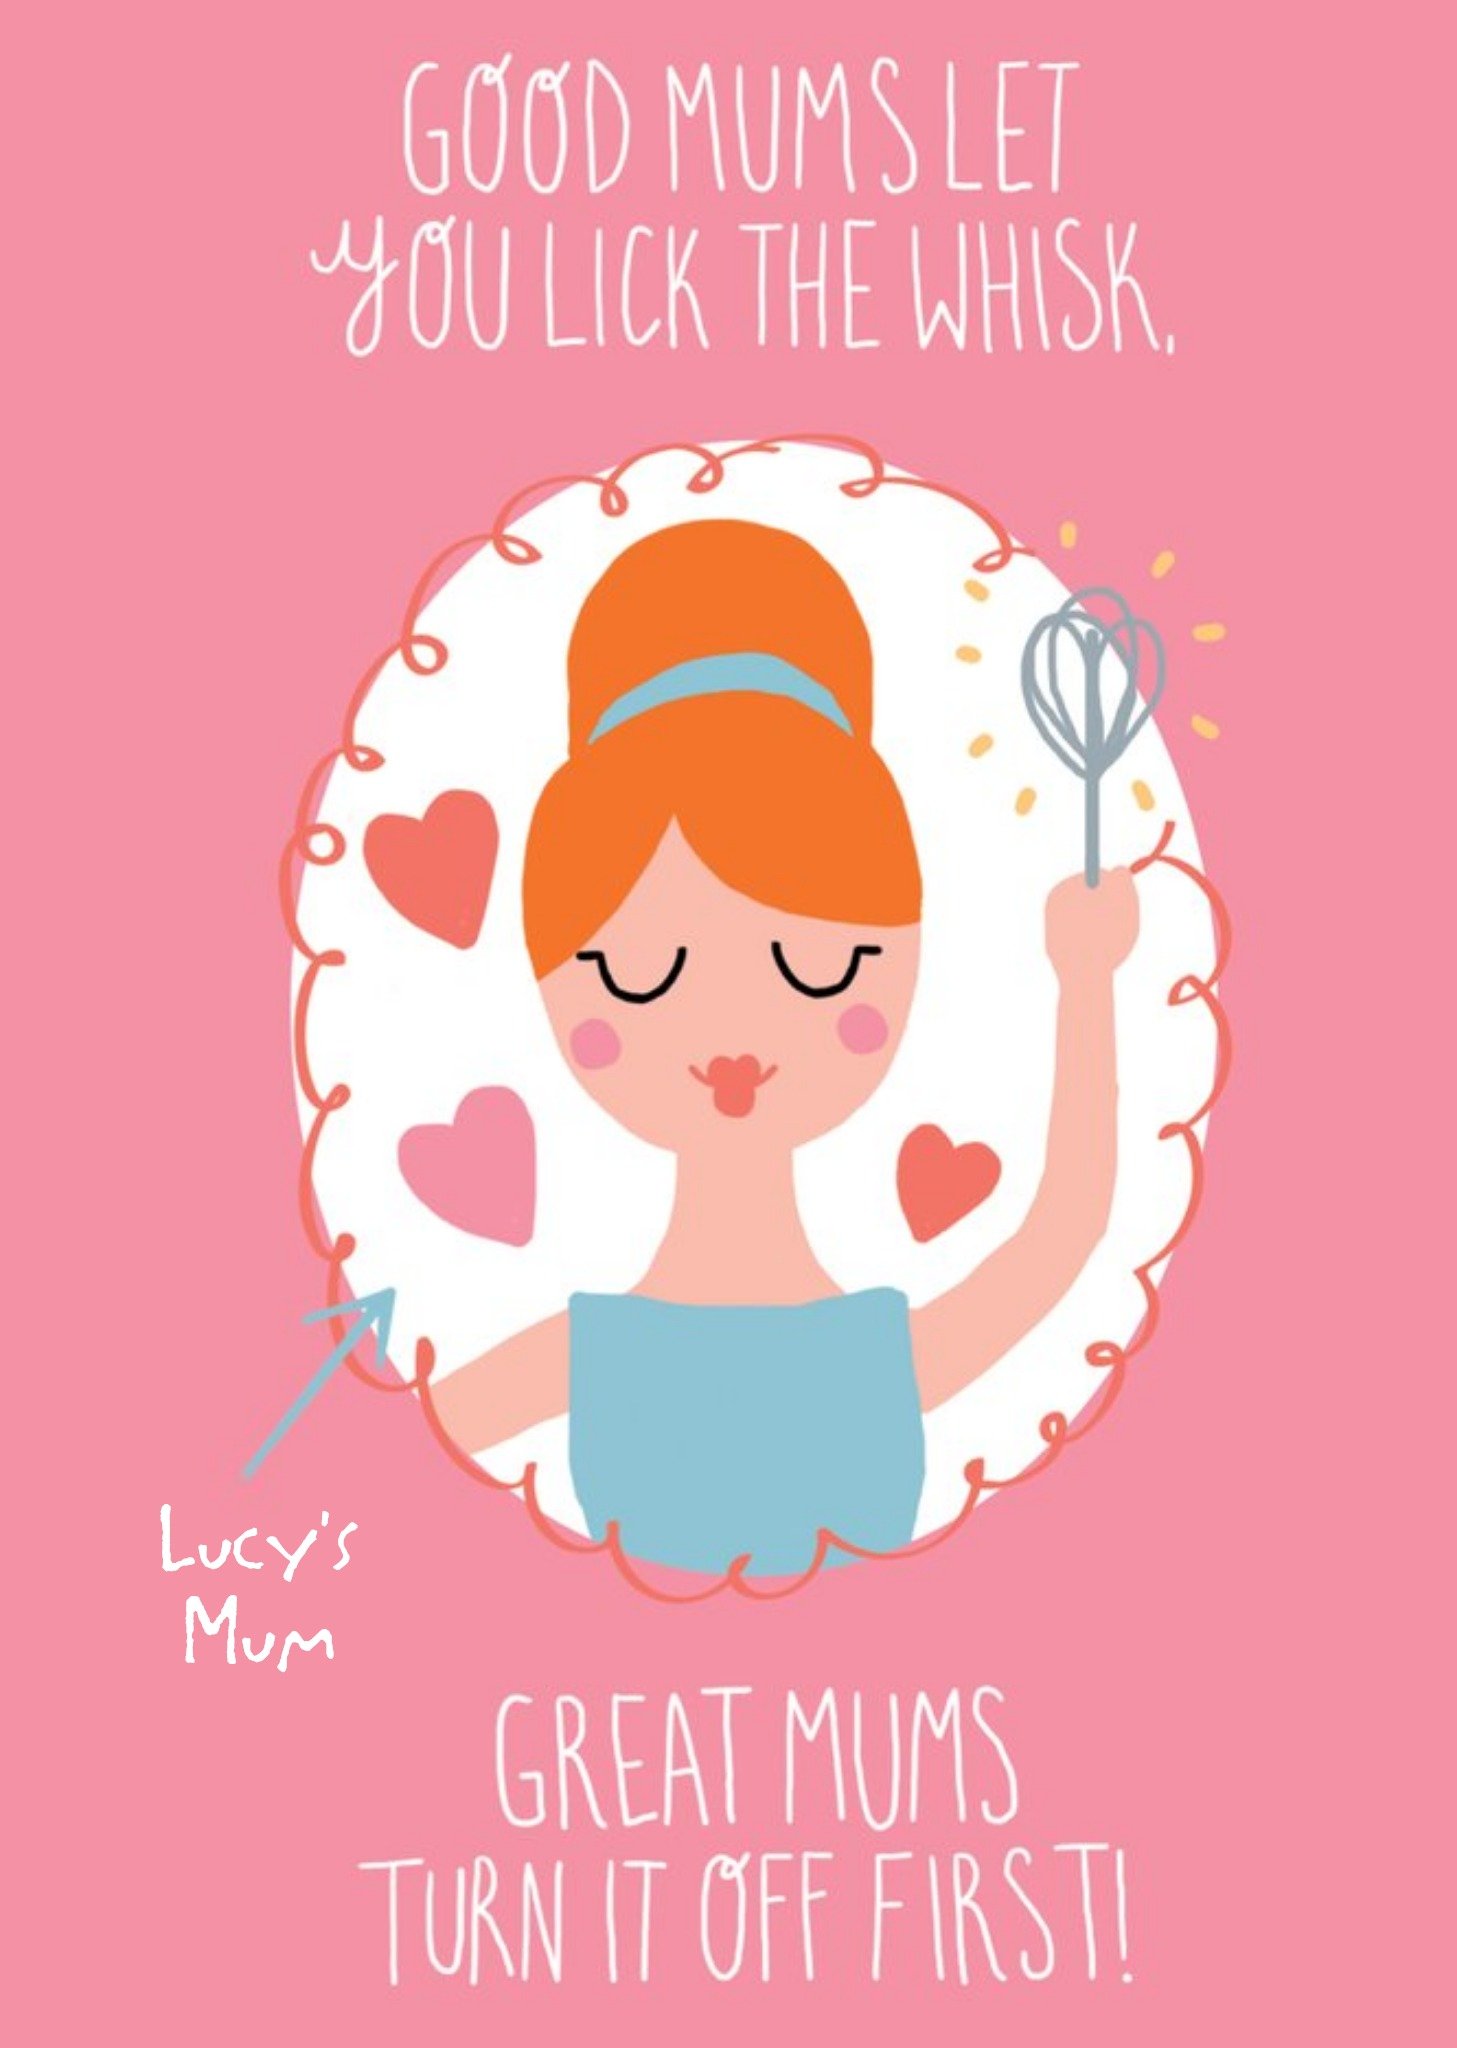 Moonpig Mother's Day Card - Funny Card - Baking - Good Mum Let You Lick The Whisk, Large